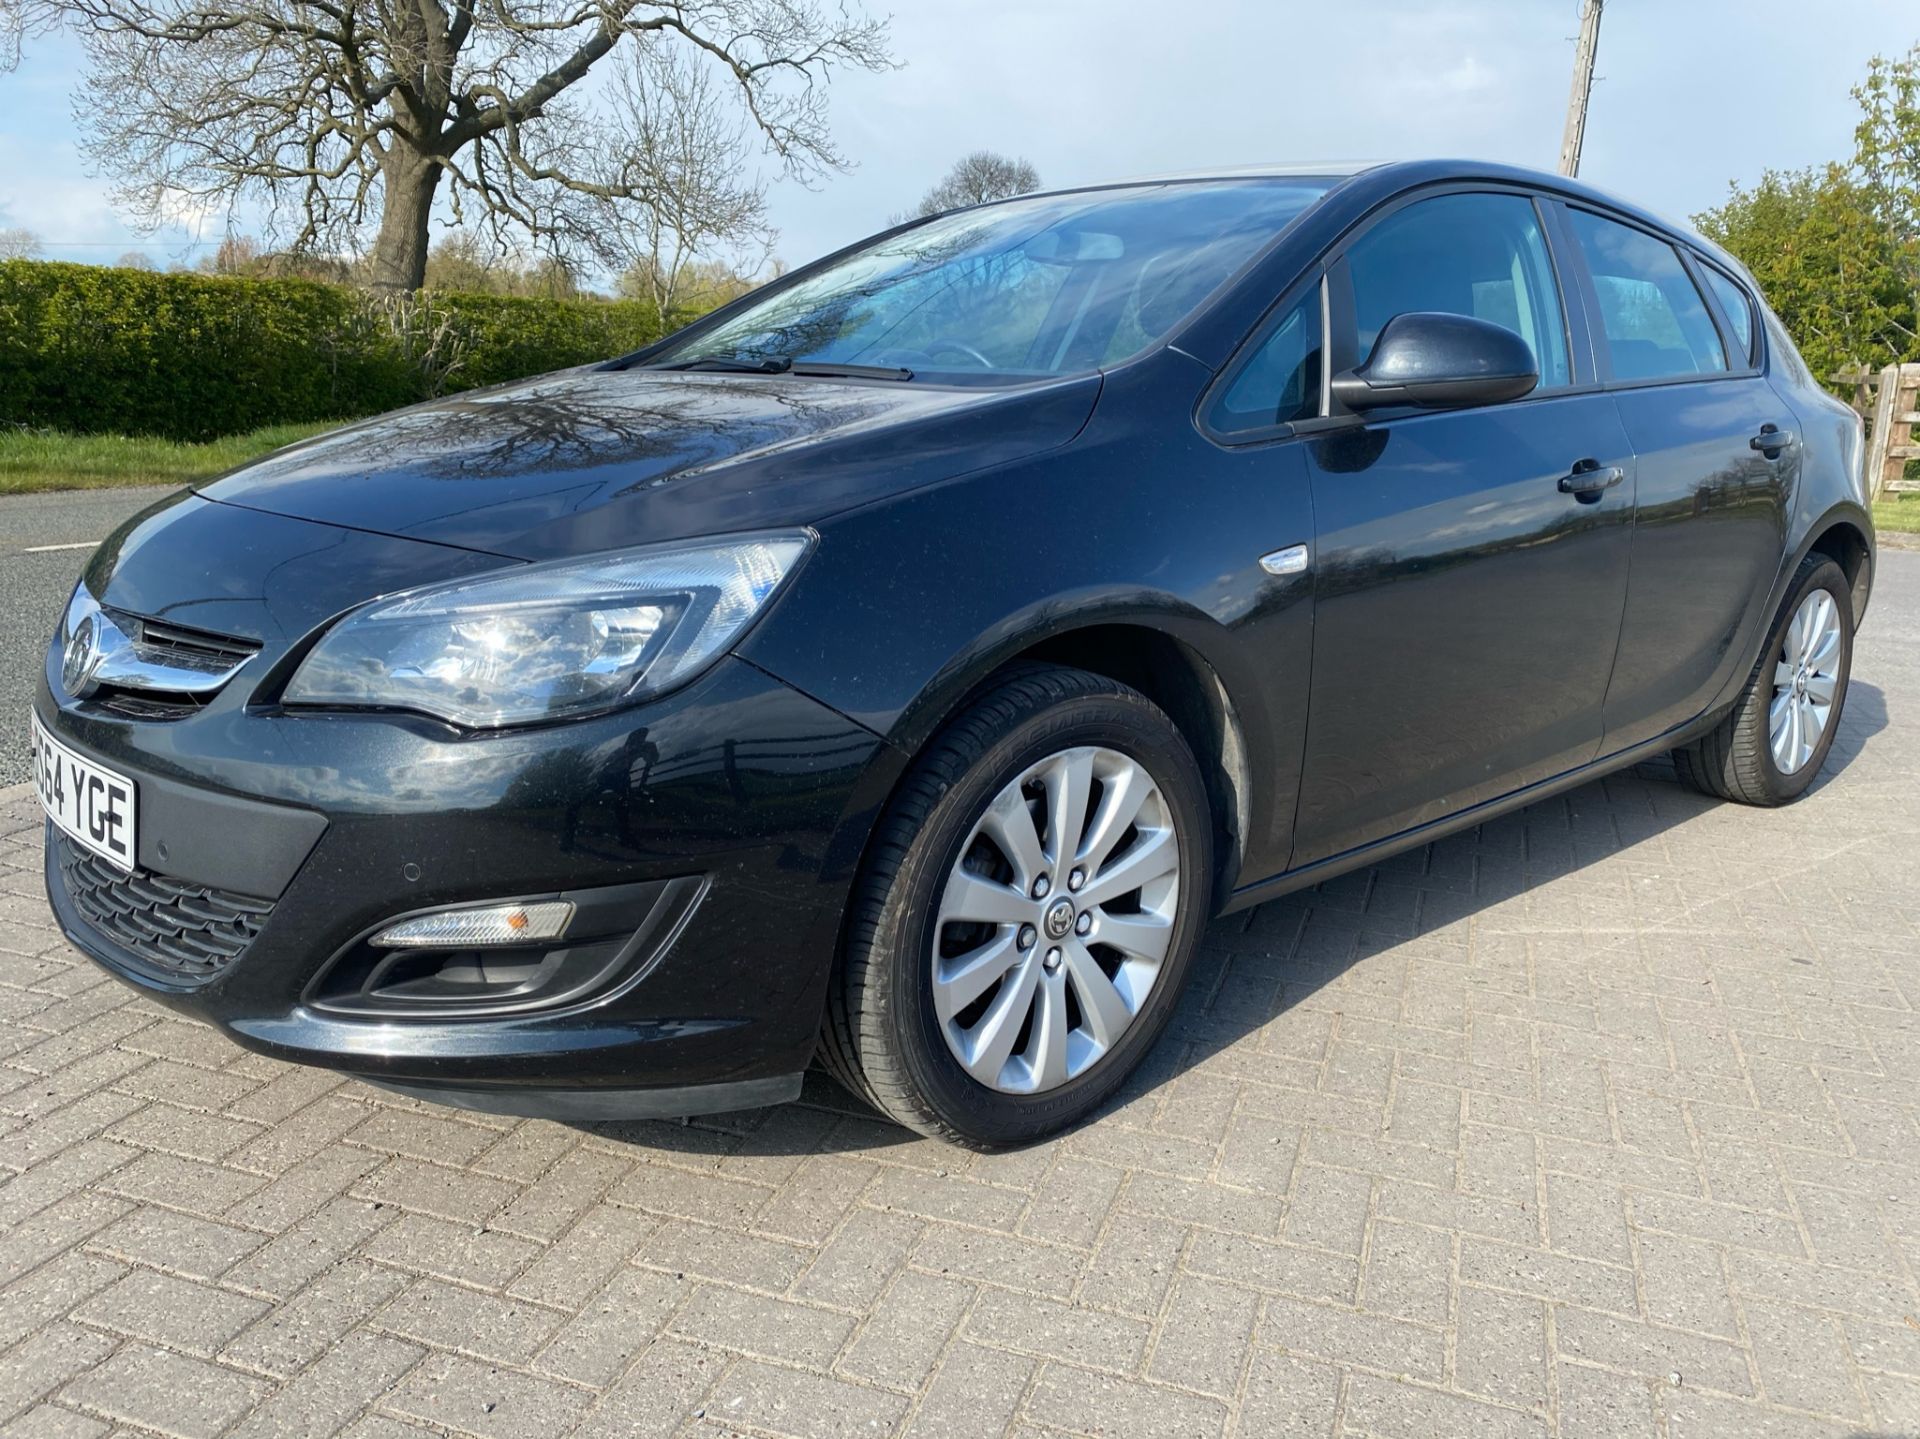 ON SALE VAUXHALL ASTRA 1.6 CDTI "ECO' "DESIGN" 5 DOOR HATCHBACK - AIR CON - NEW SHAPE - 2015 MODEL - - Image 3 of 14